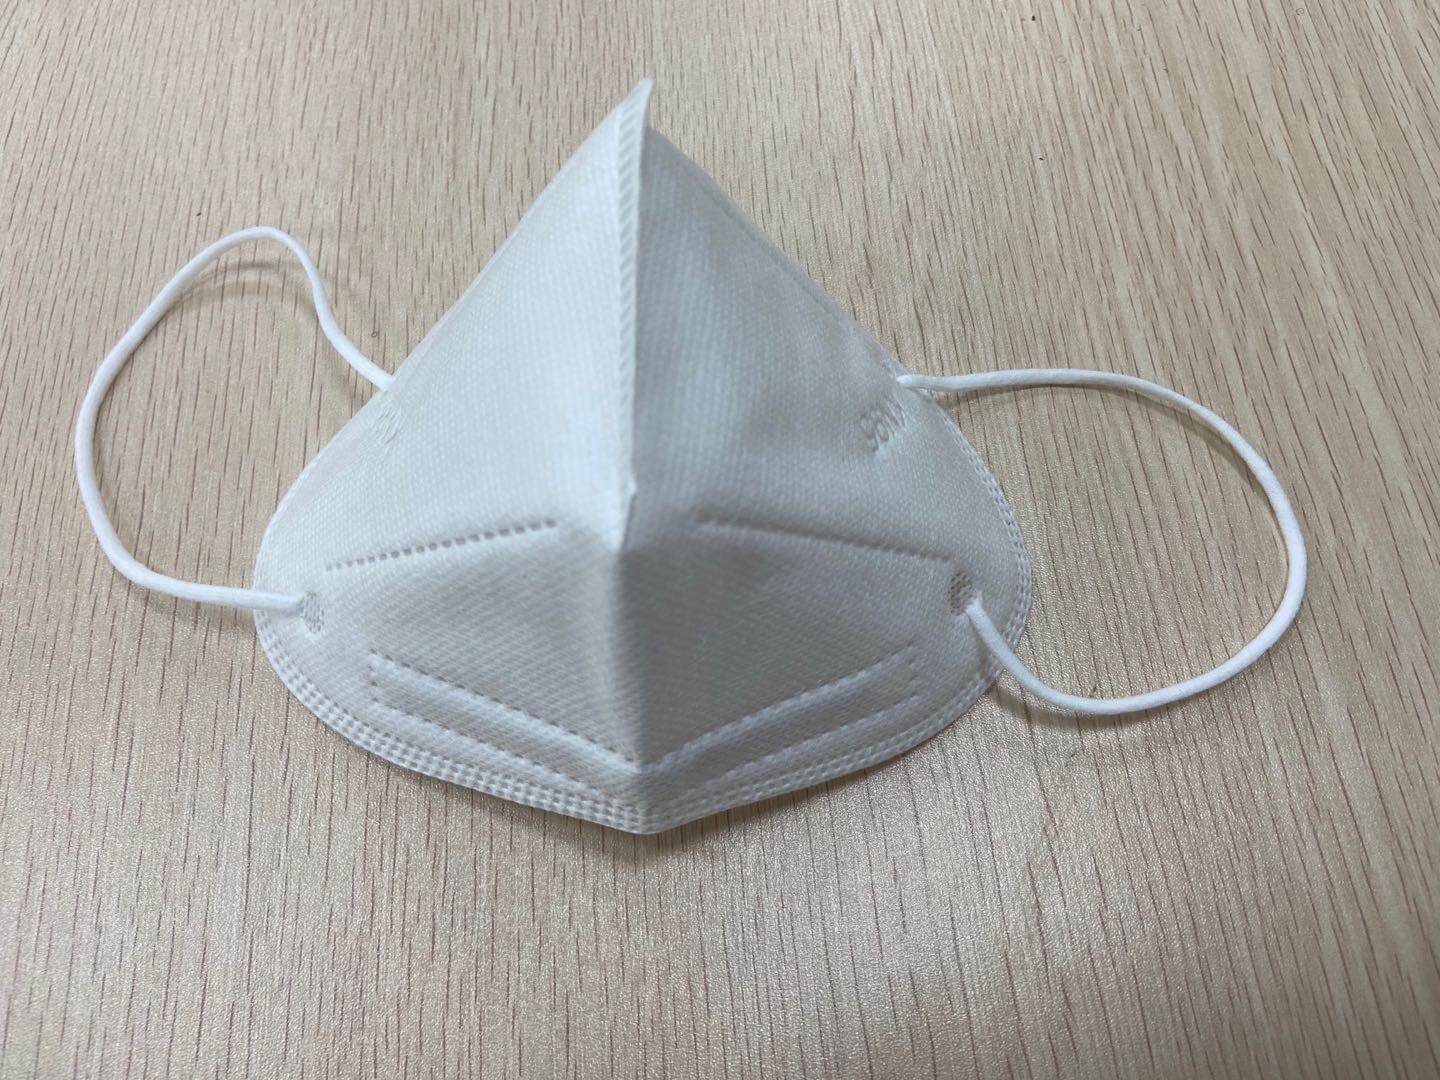  Stocked KN95 Disposable Pollution Mask White Color Three Dimensional Breathing Space Manufactures